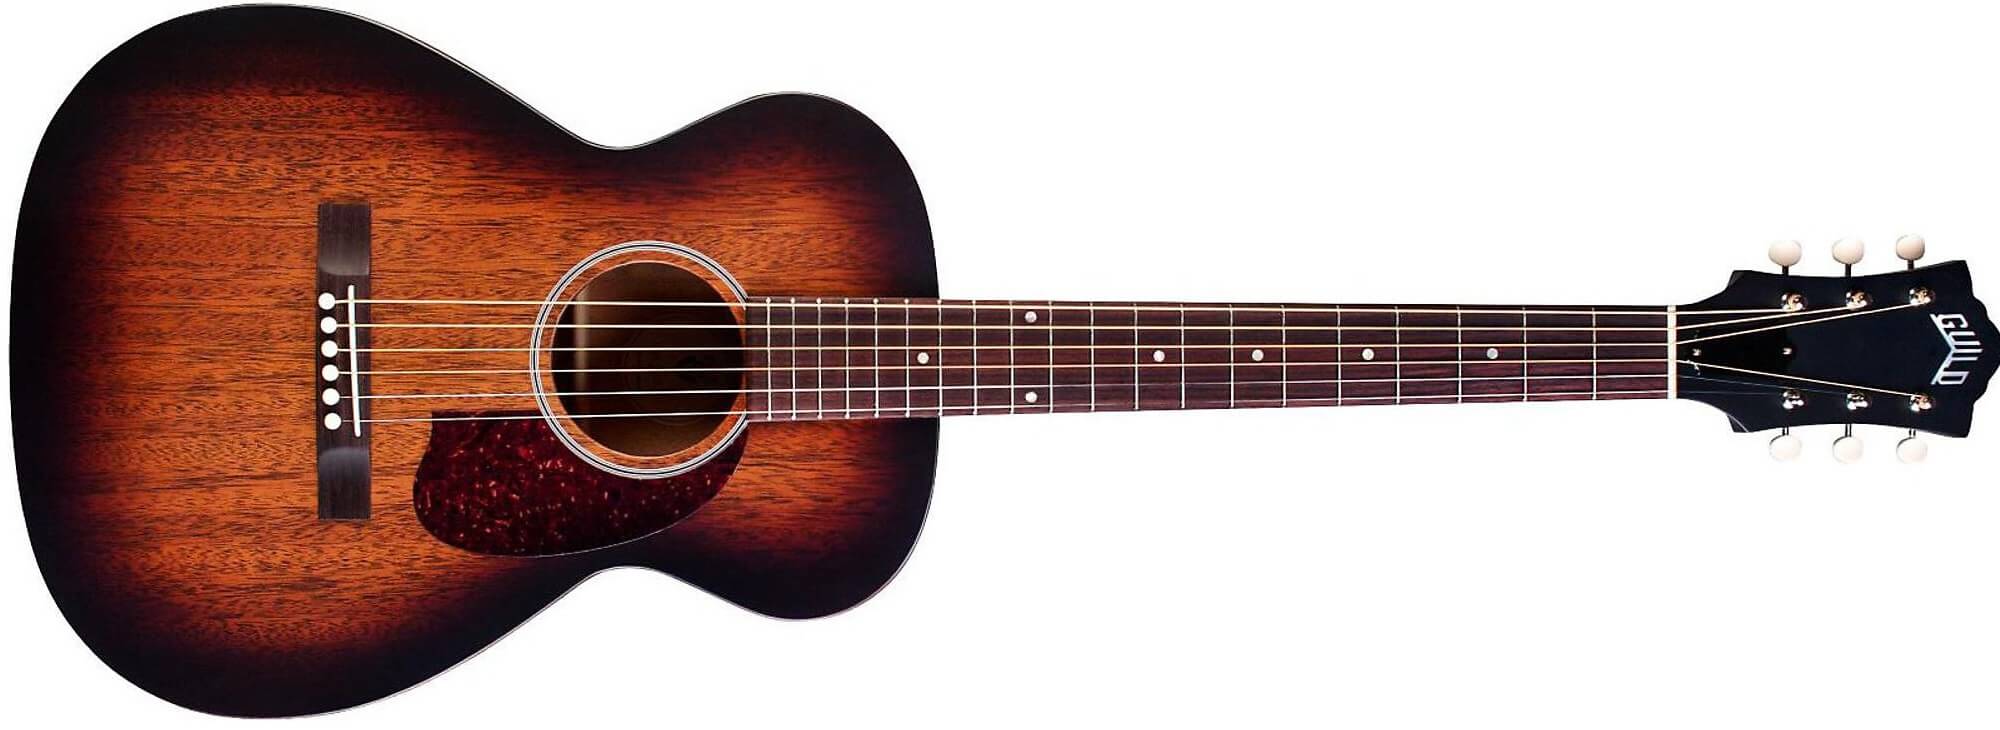 Guild M-20 Acoustic Guitar on a white background